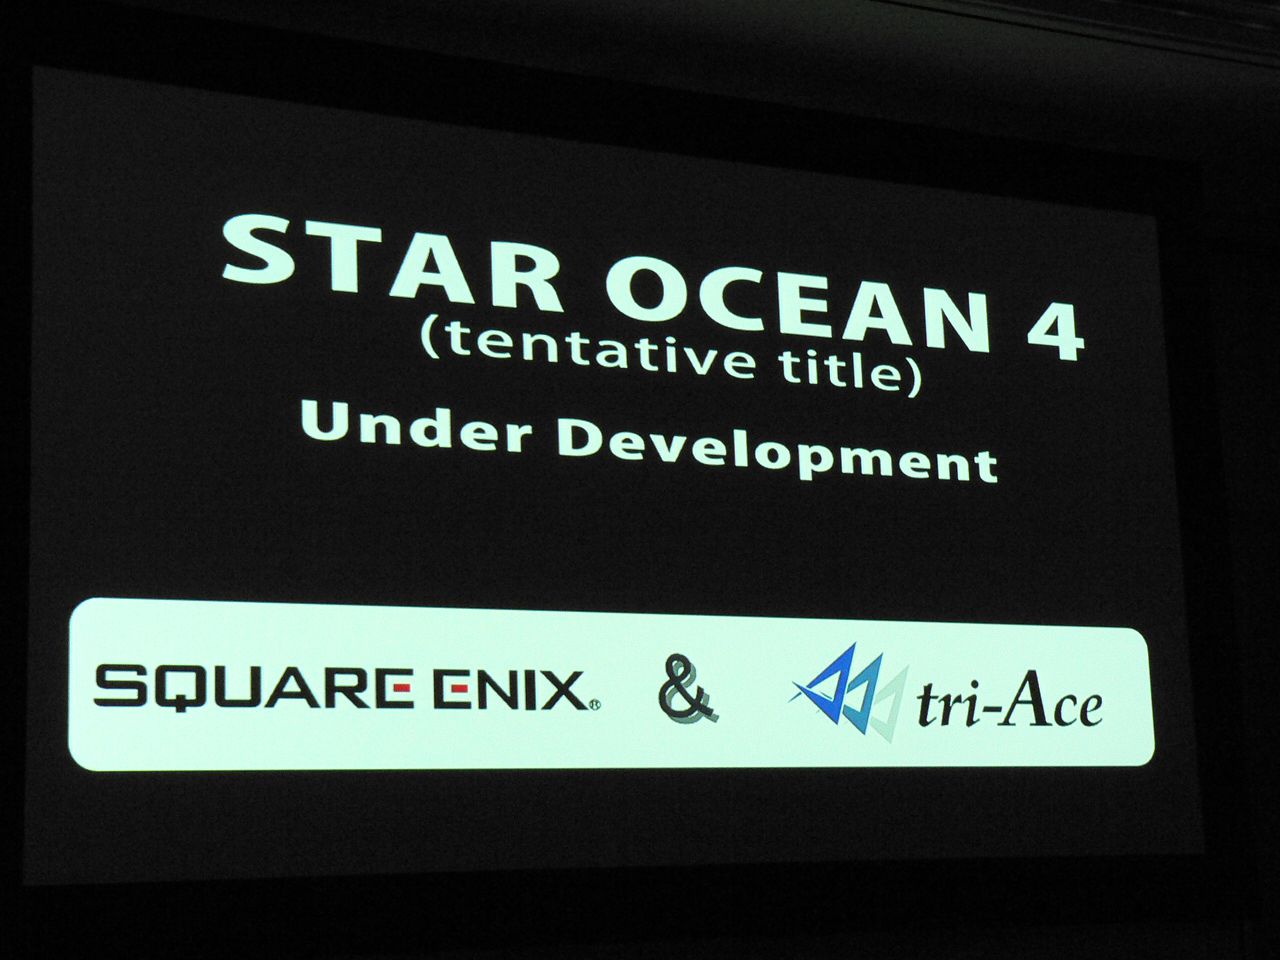 Star ocean conference square enix 3